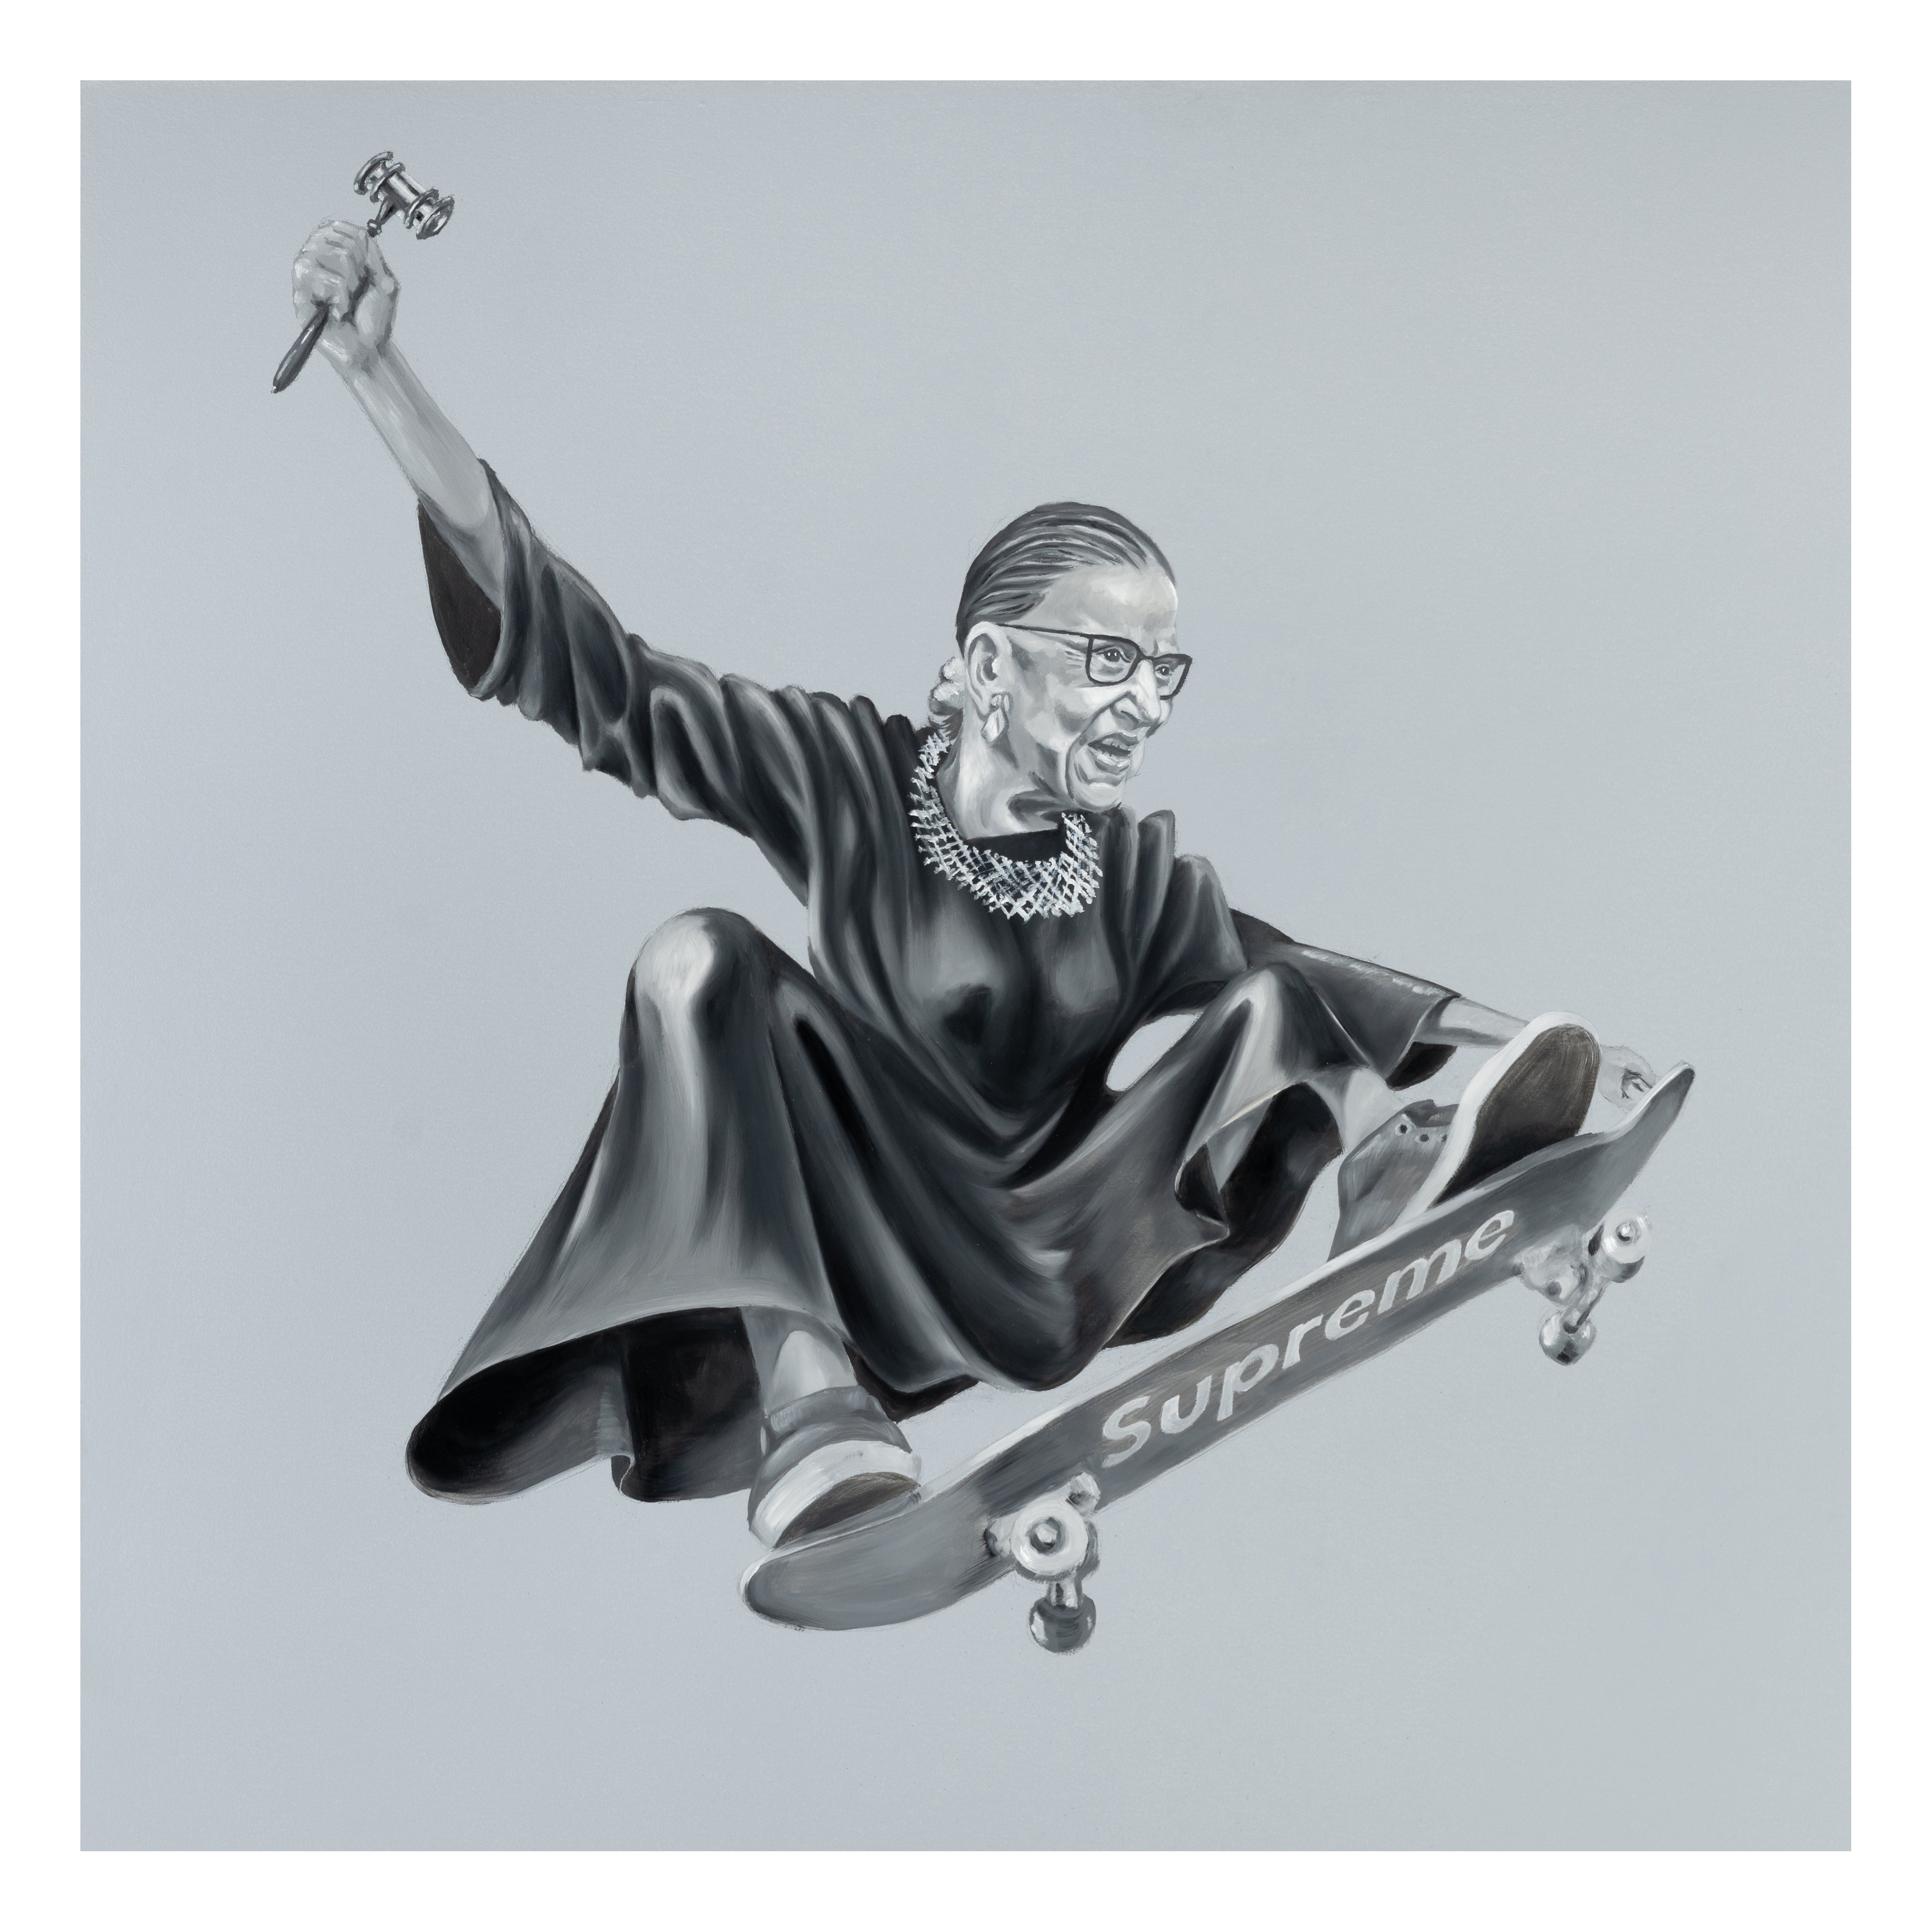 NEW SIZE // PRE-ORDER // 20" x 20" Ruth "Skater" Ginsburg LIMITED Edition Print